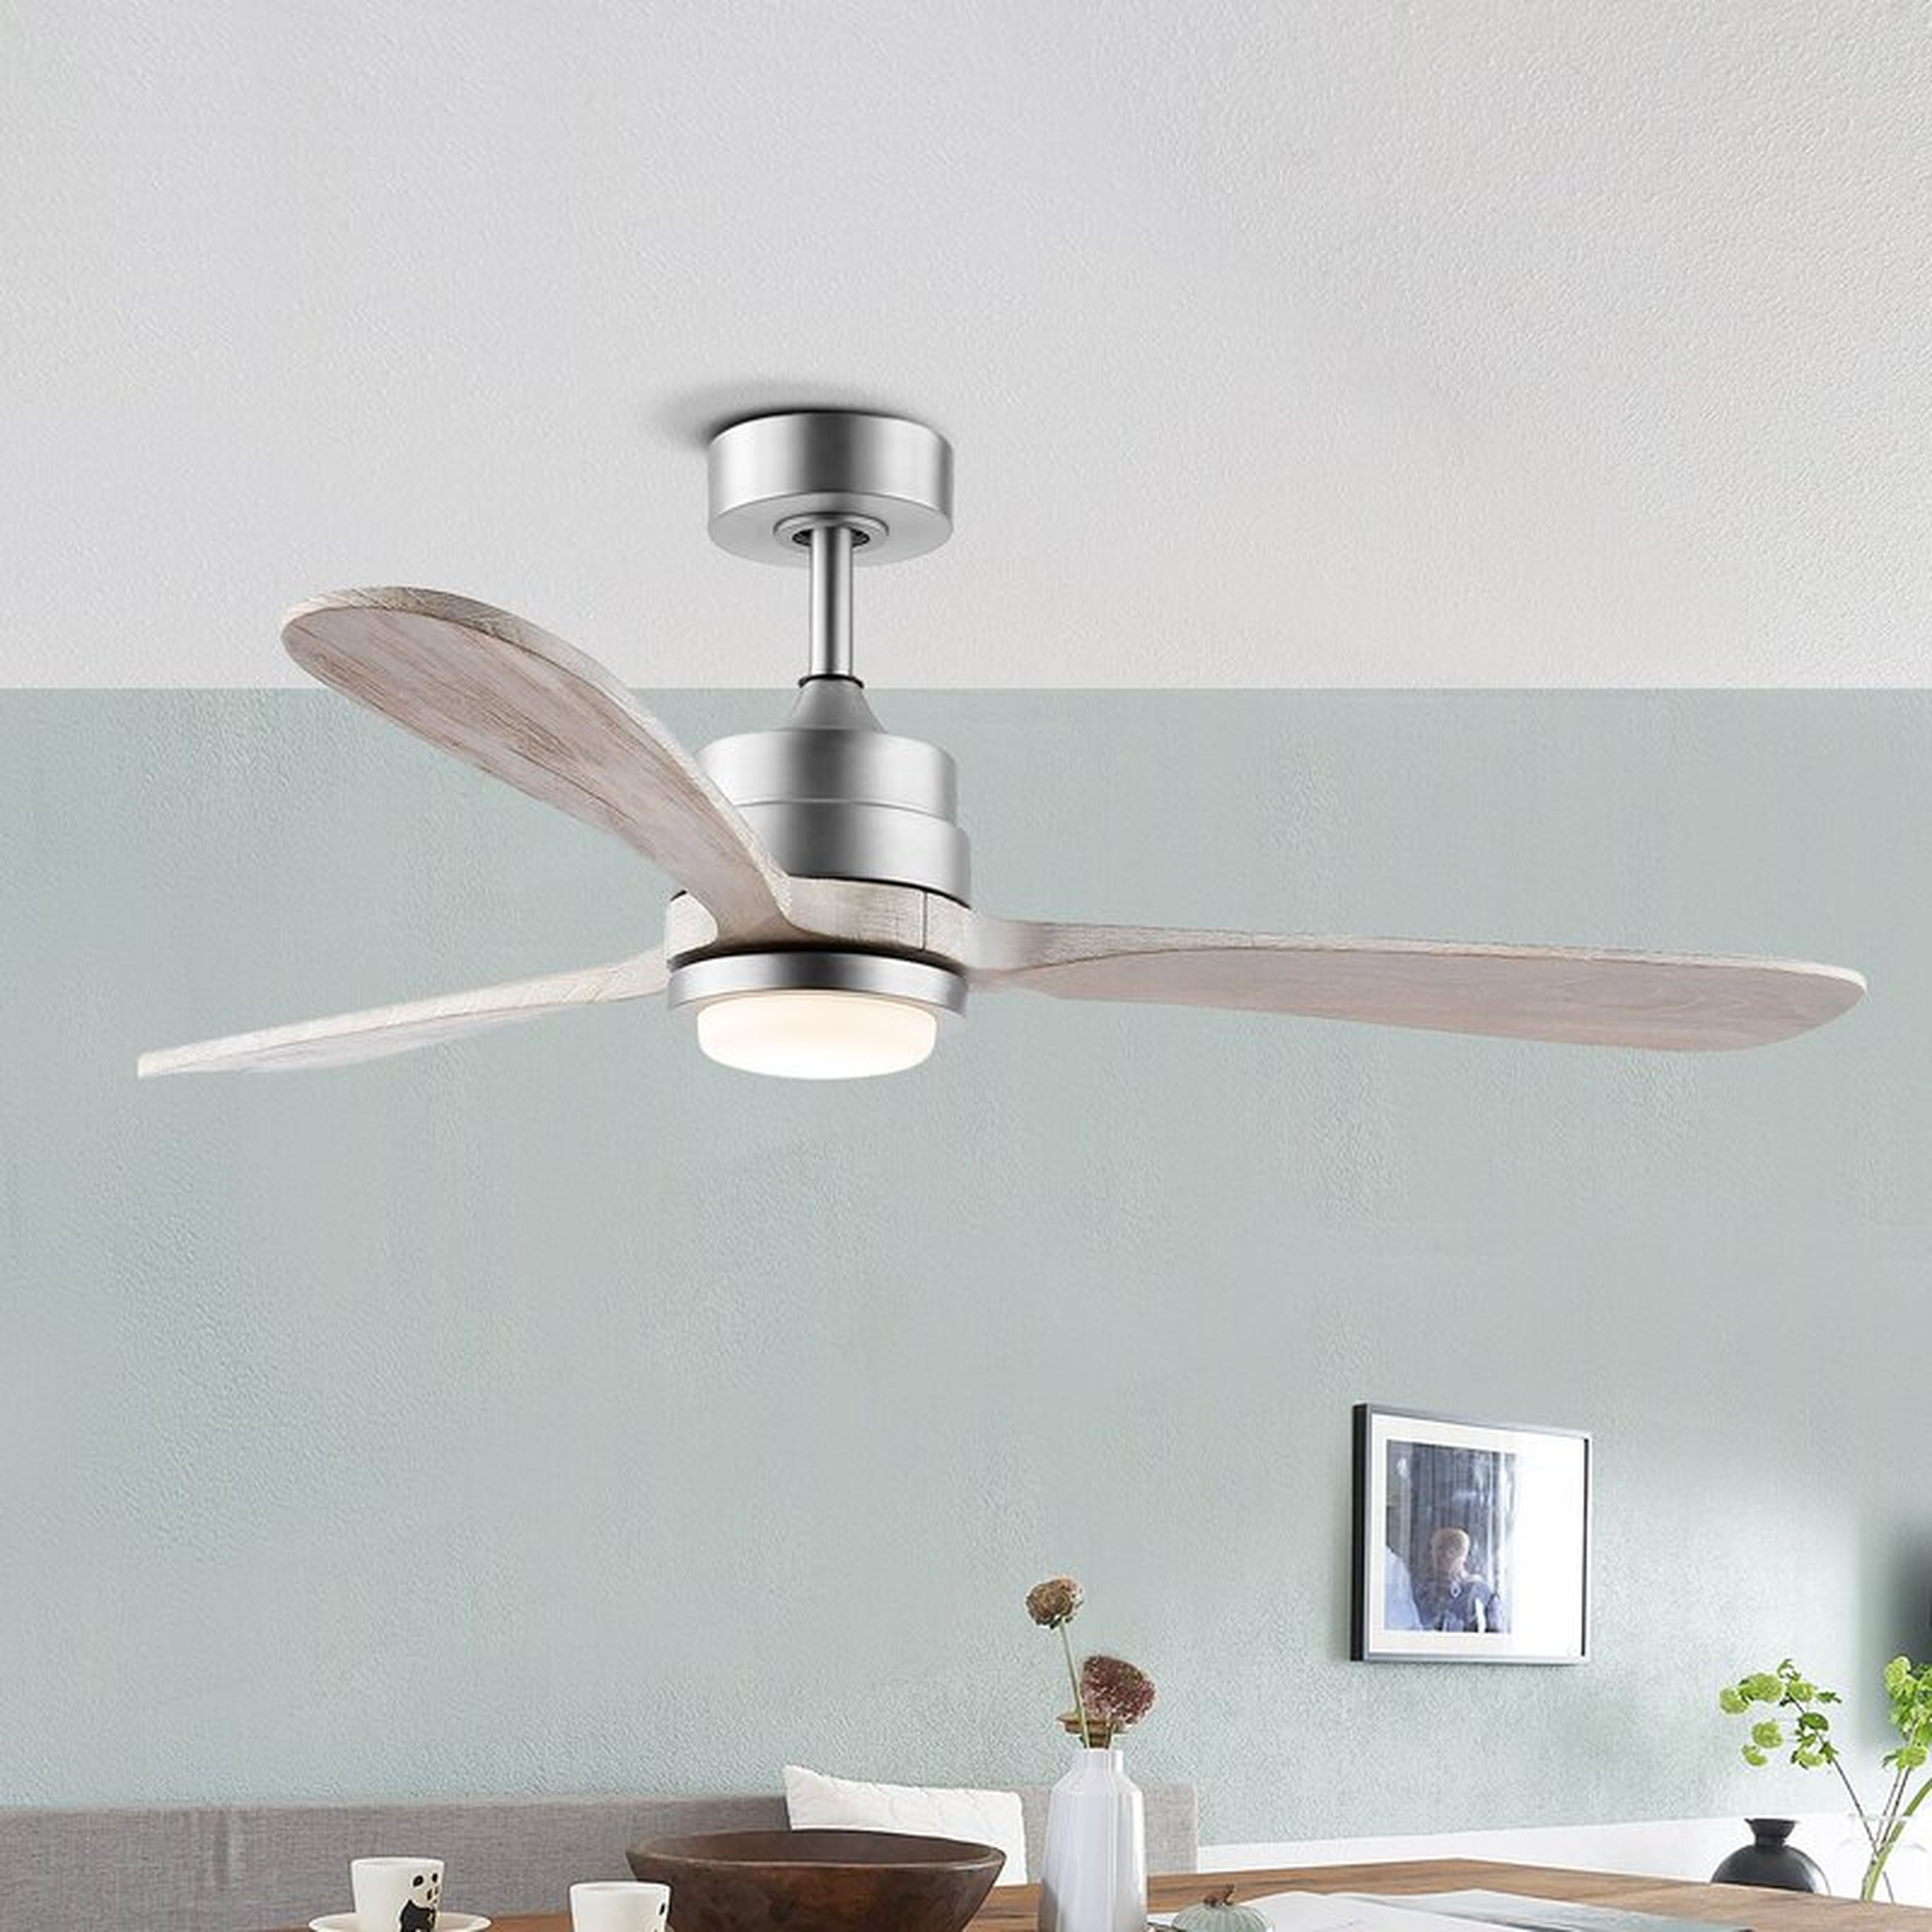 52'' Gatto 3 - Blade LED Propeller Ceiling Fan with Remote Control and Light Kit Included - Wayfair